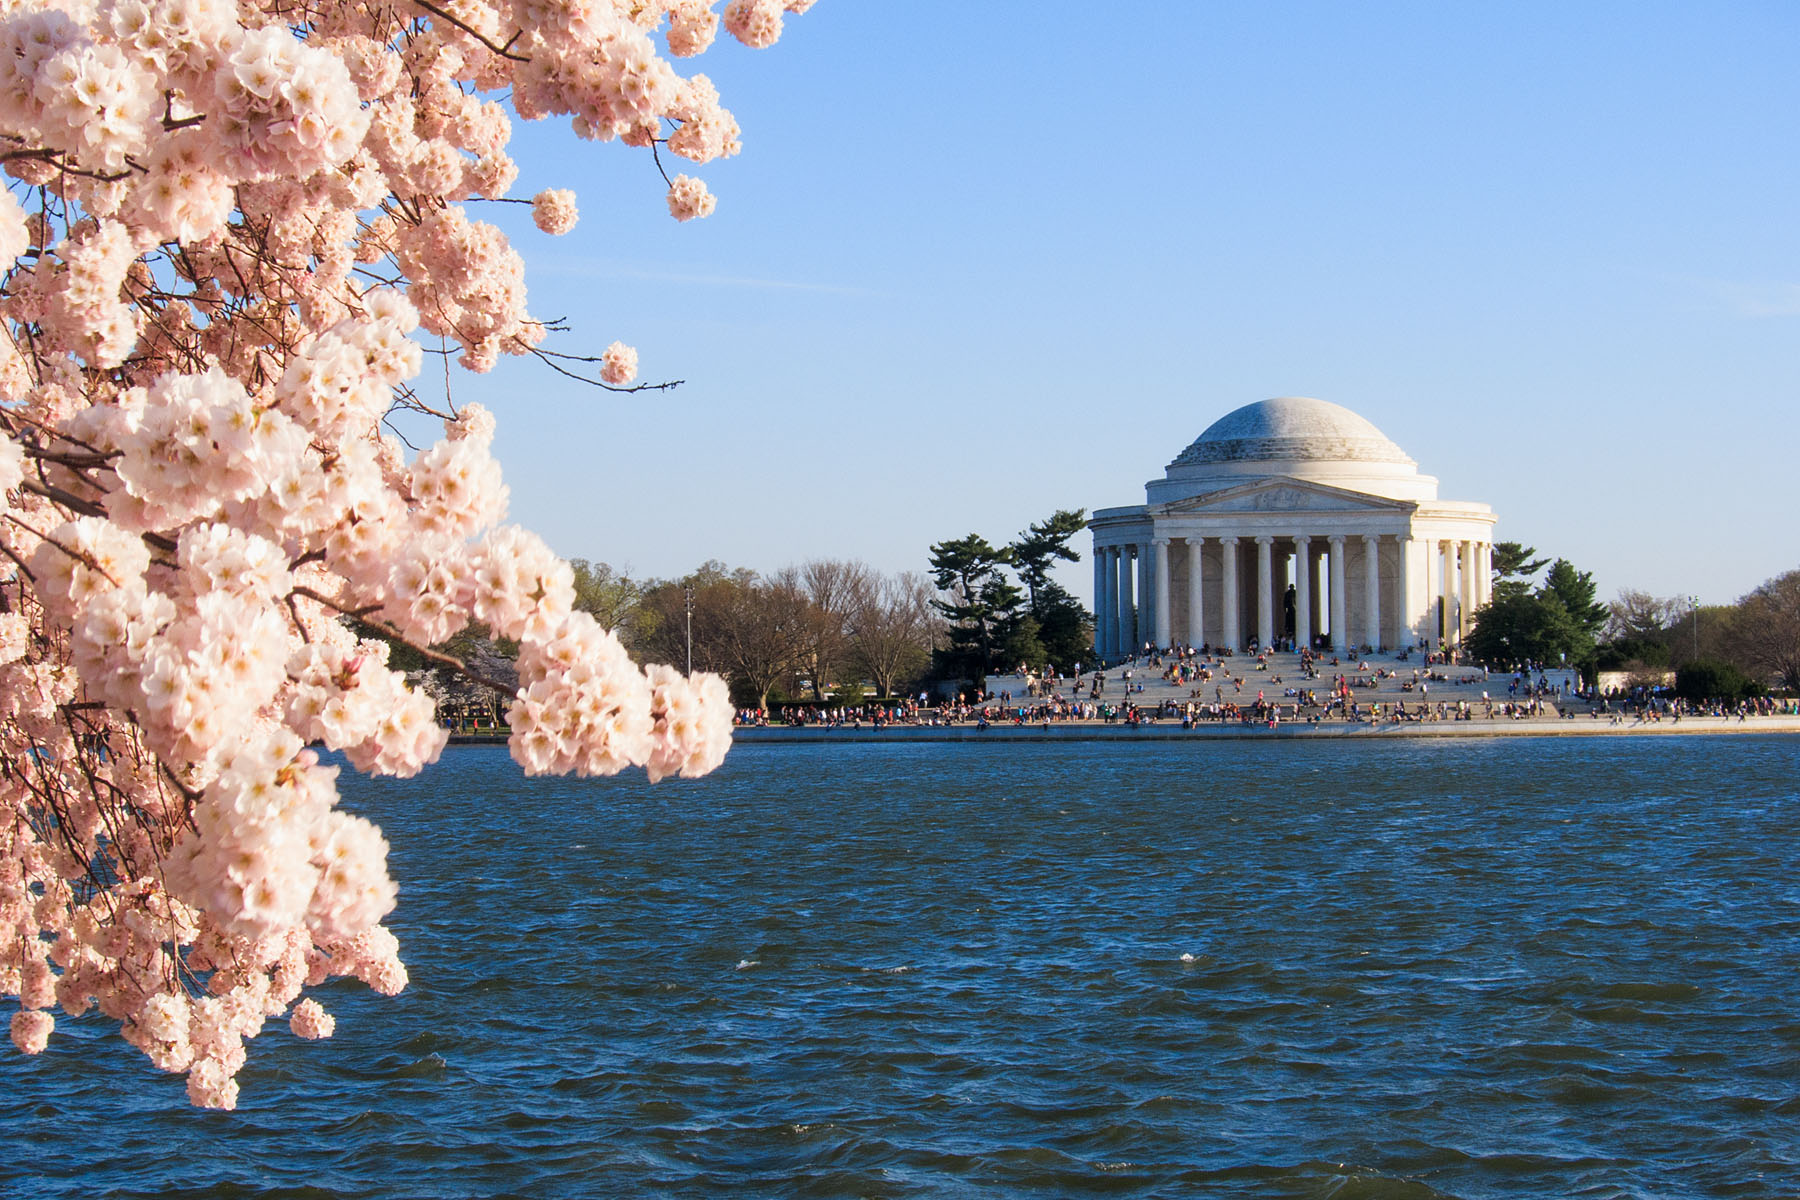 Cherry Blossom Festival at the Tidal Basin, looking across to the Jefferson Memorial, Washington, DC.  Click for next photo.